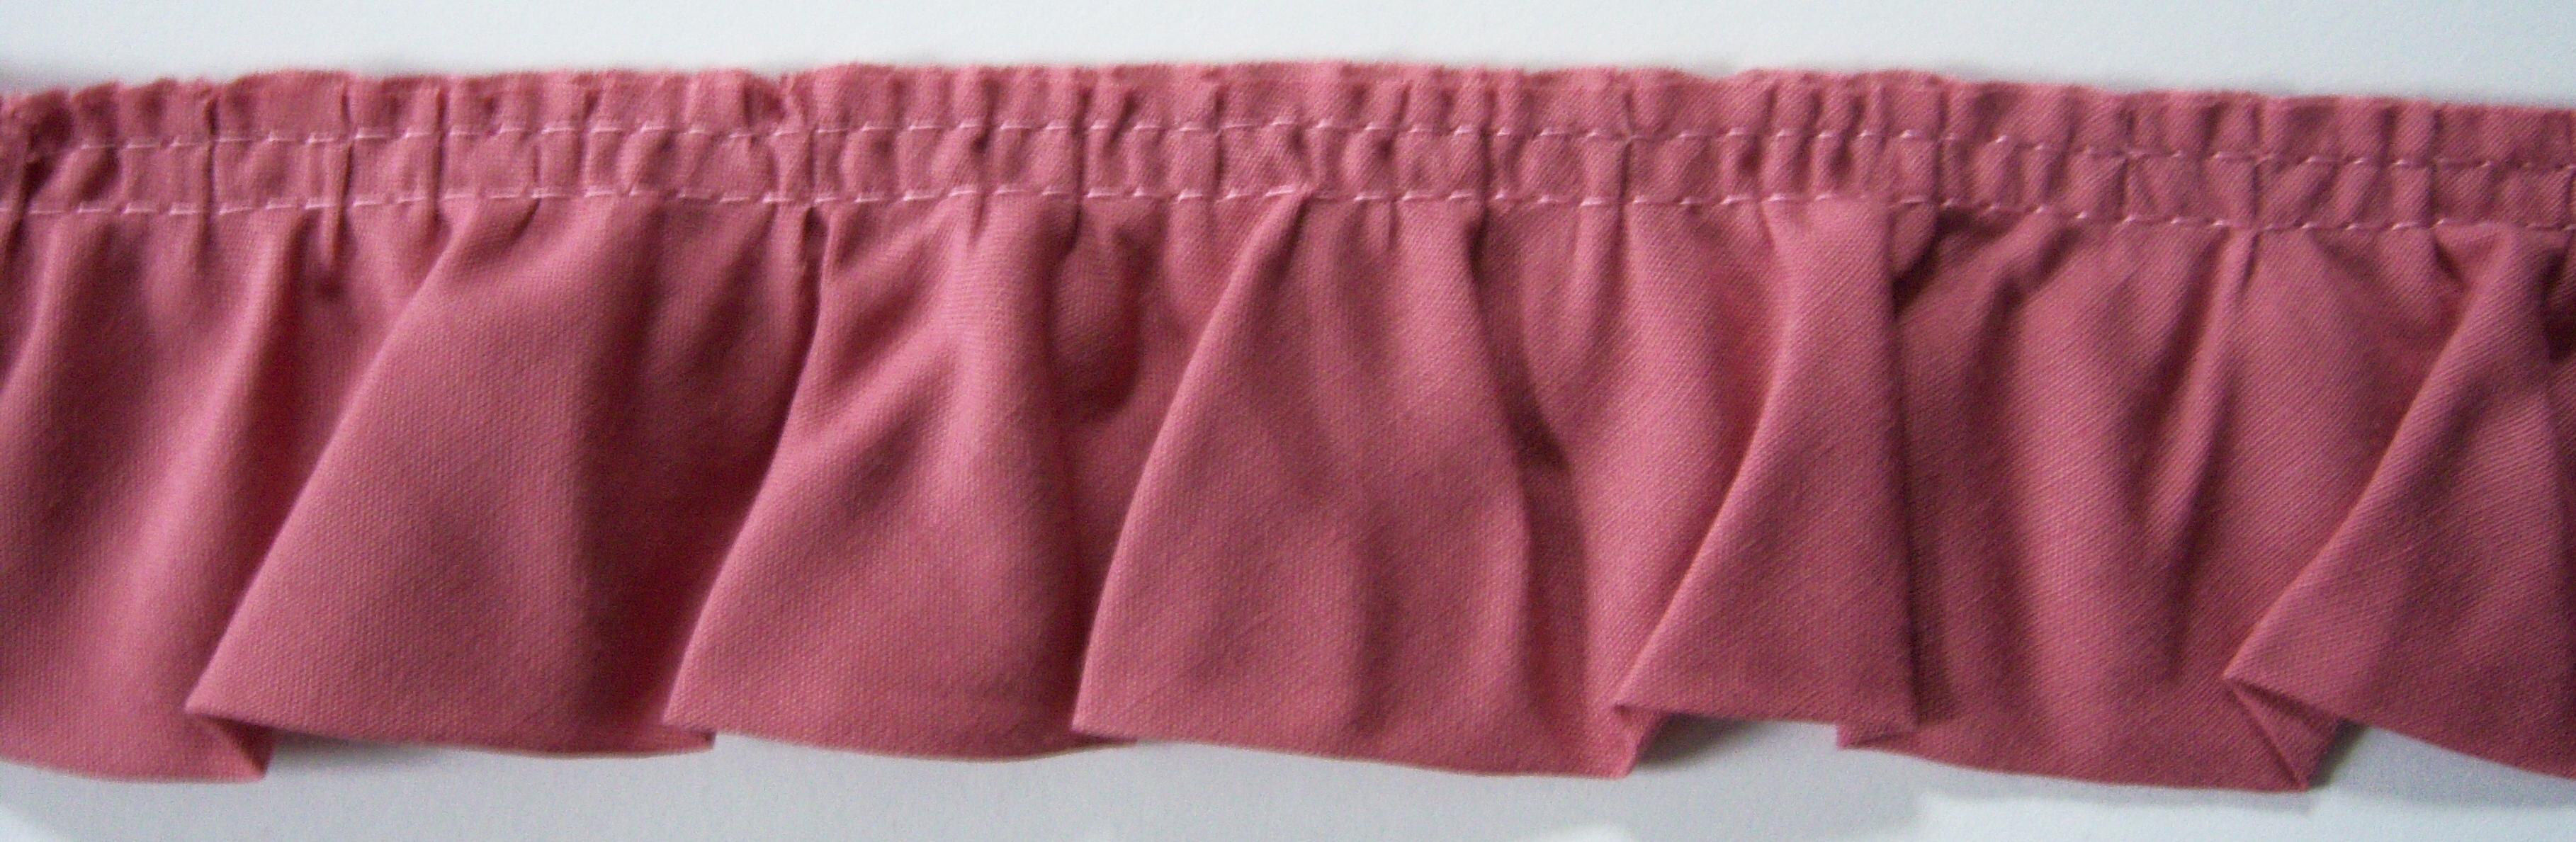 Dusty Rose 2" Ruffled Poly Cotton